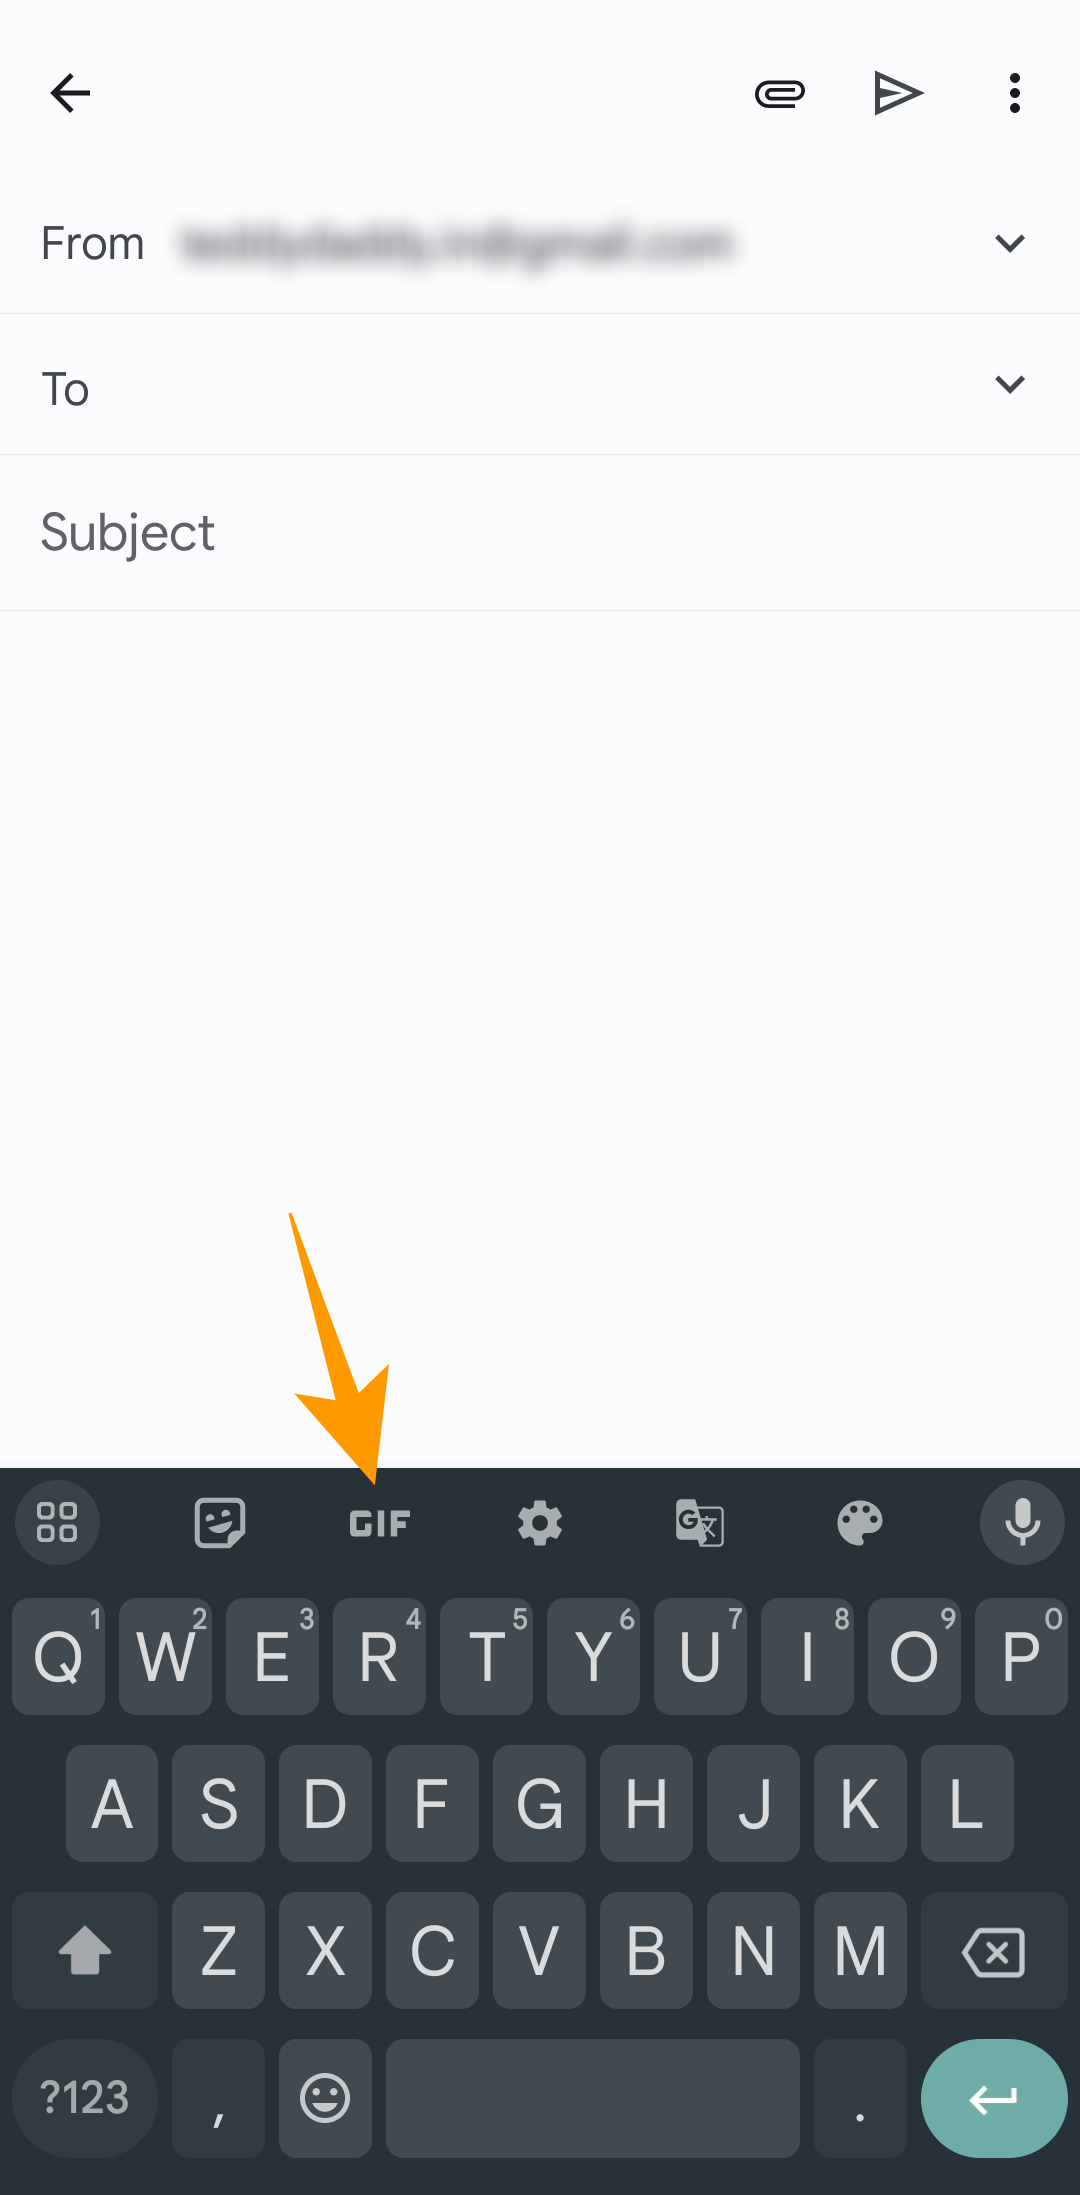 Gmail app compose screen